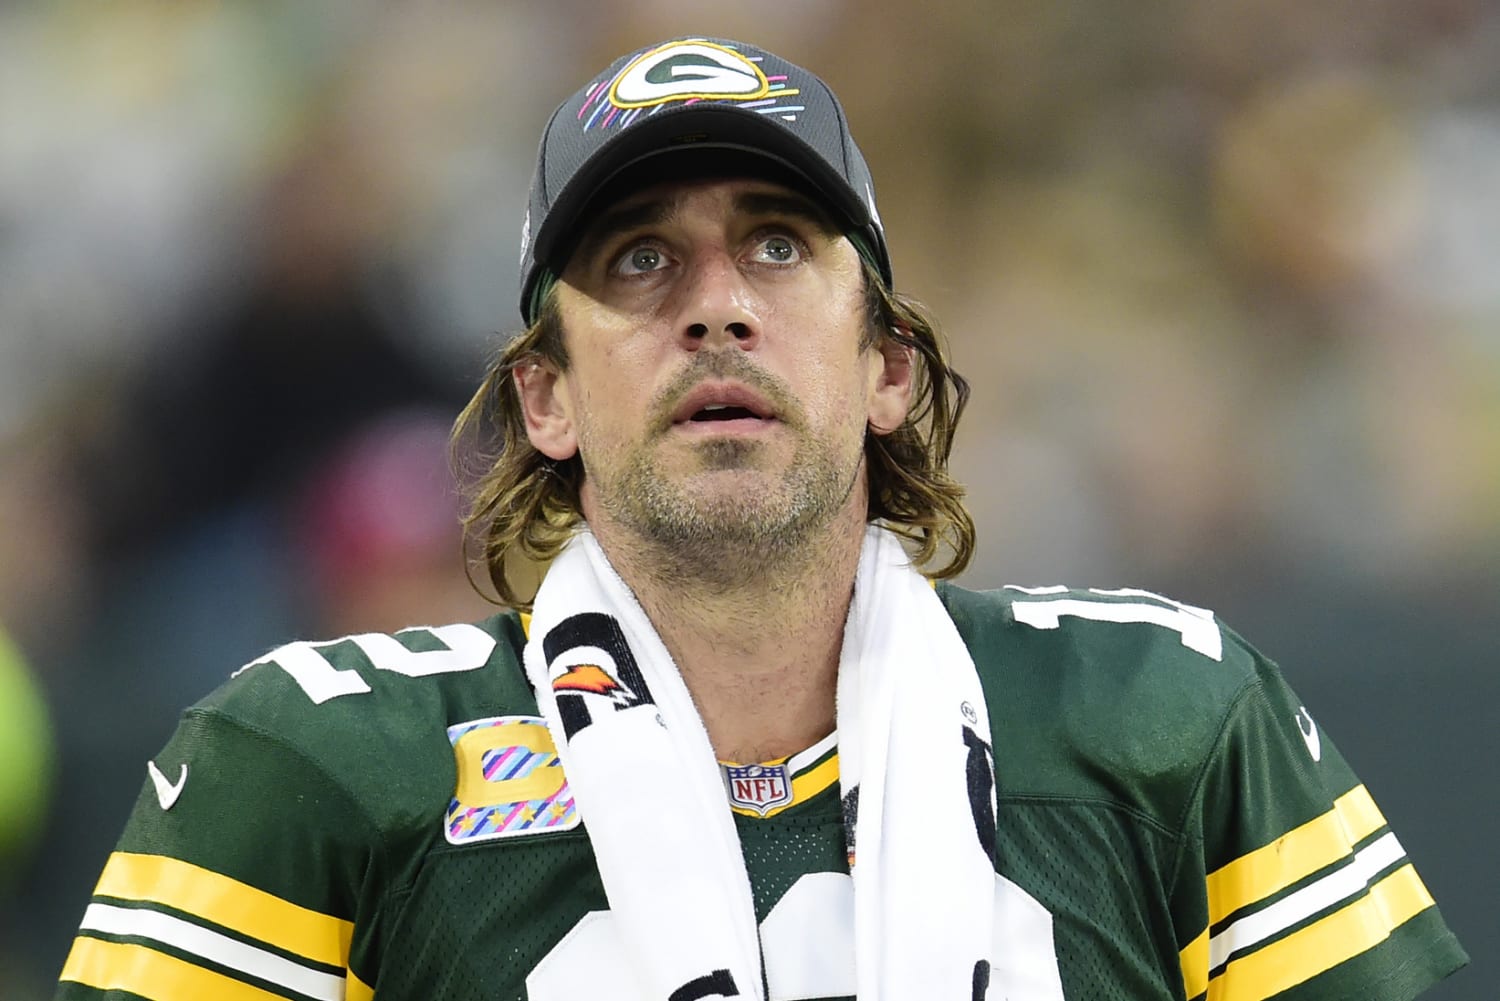 Aaron Rodgers says he takes ‘full responsibility’ for people feeling ‘misled’ by comments on Covid vaccine